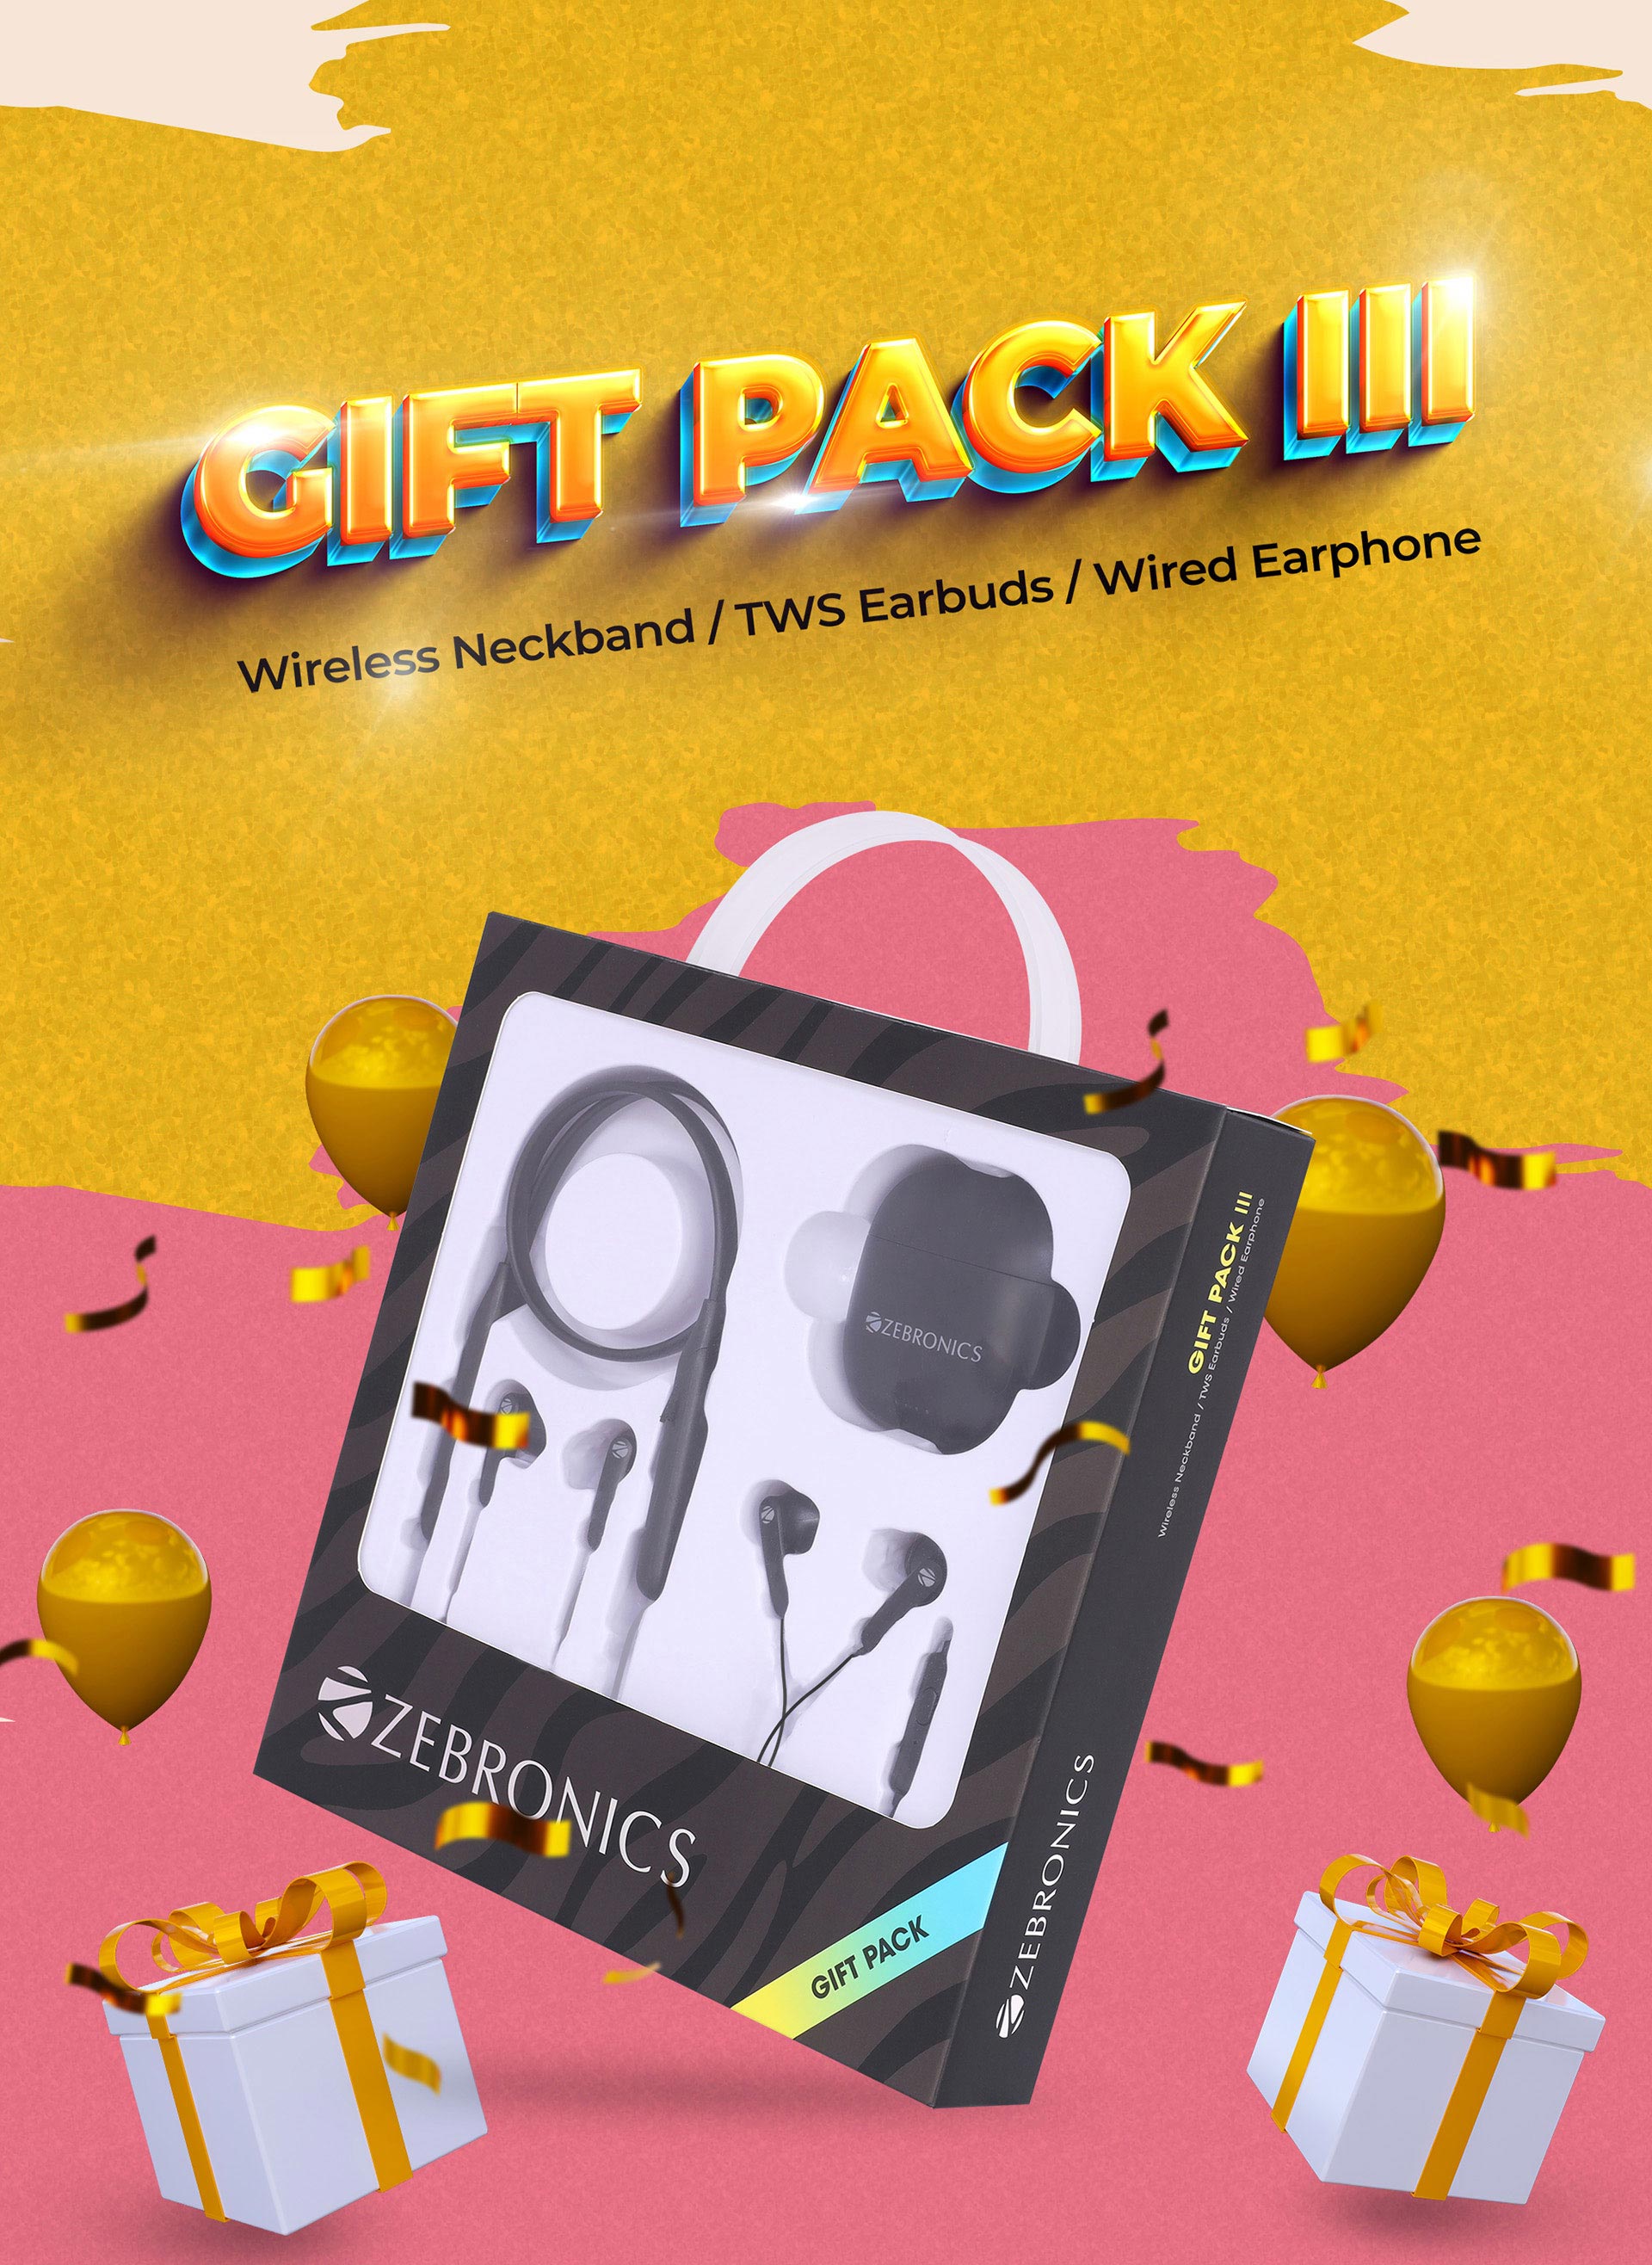 giftpack111-1